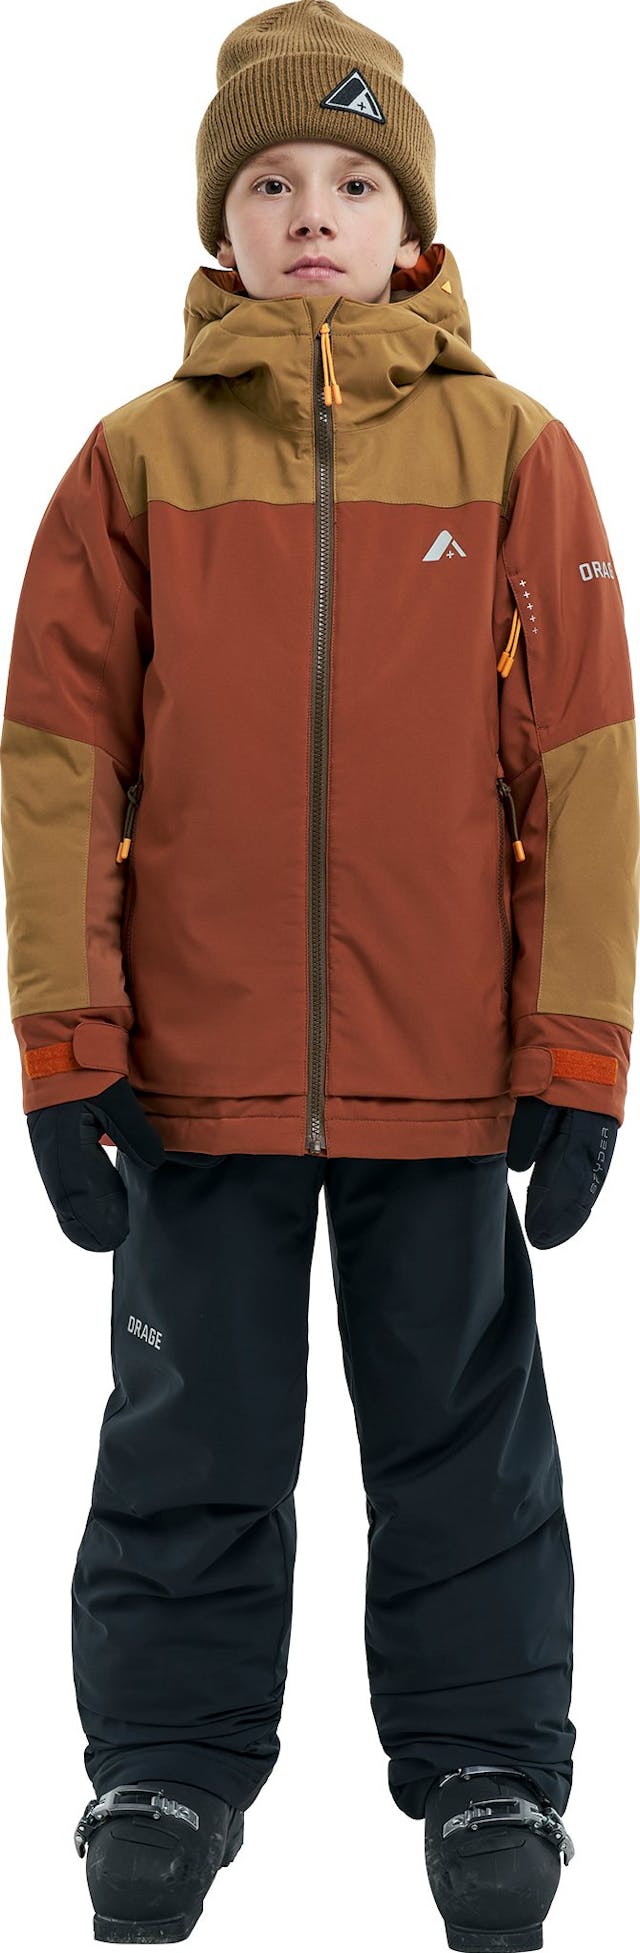 Product image for Orford Jacket - Boy's